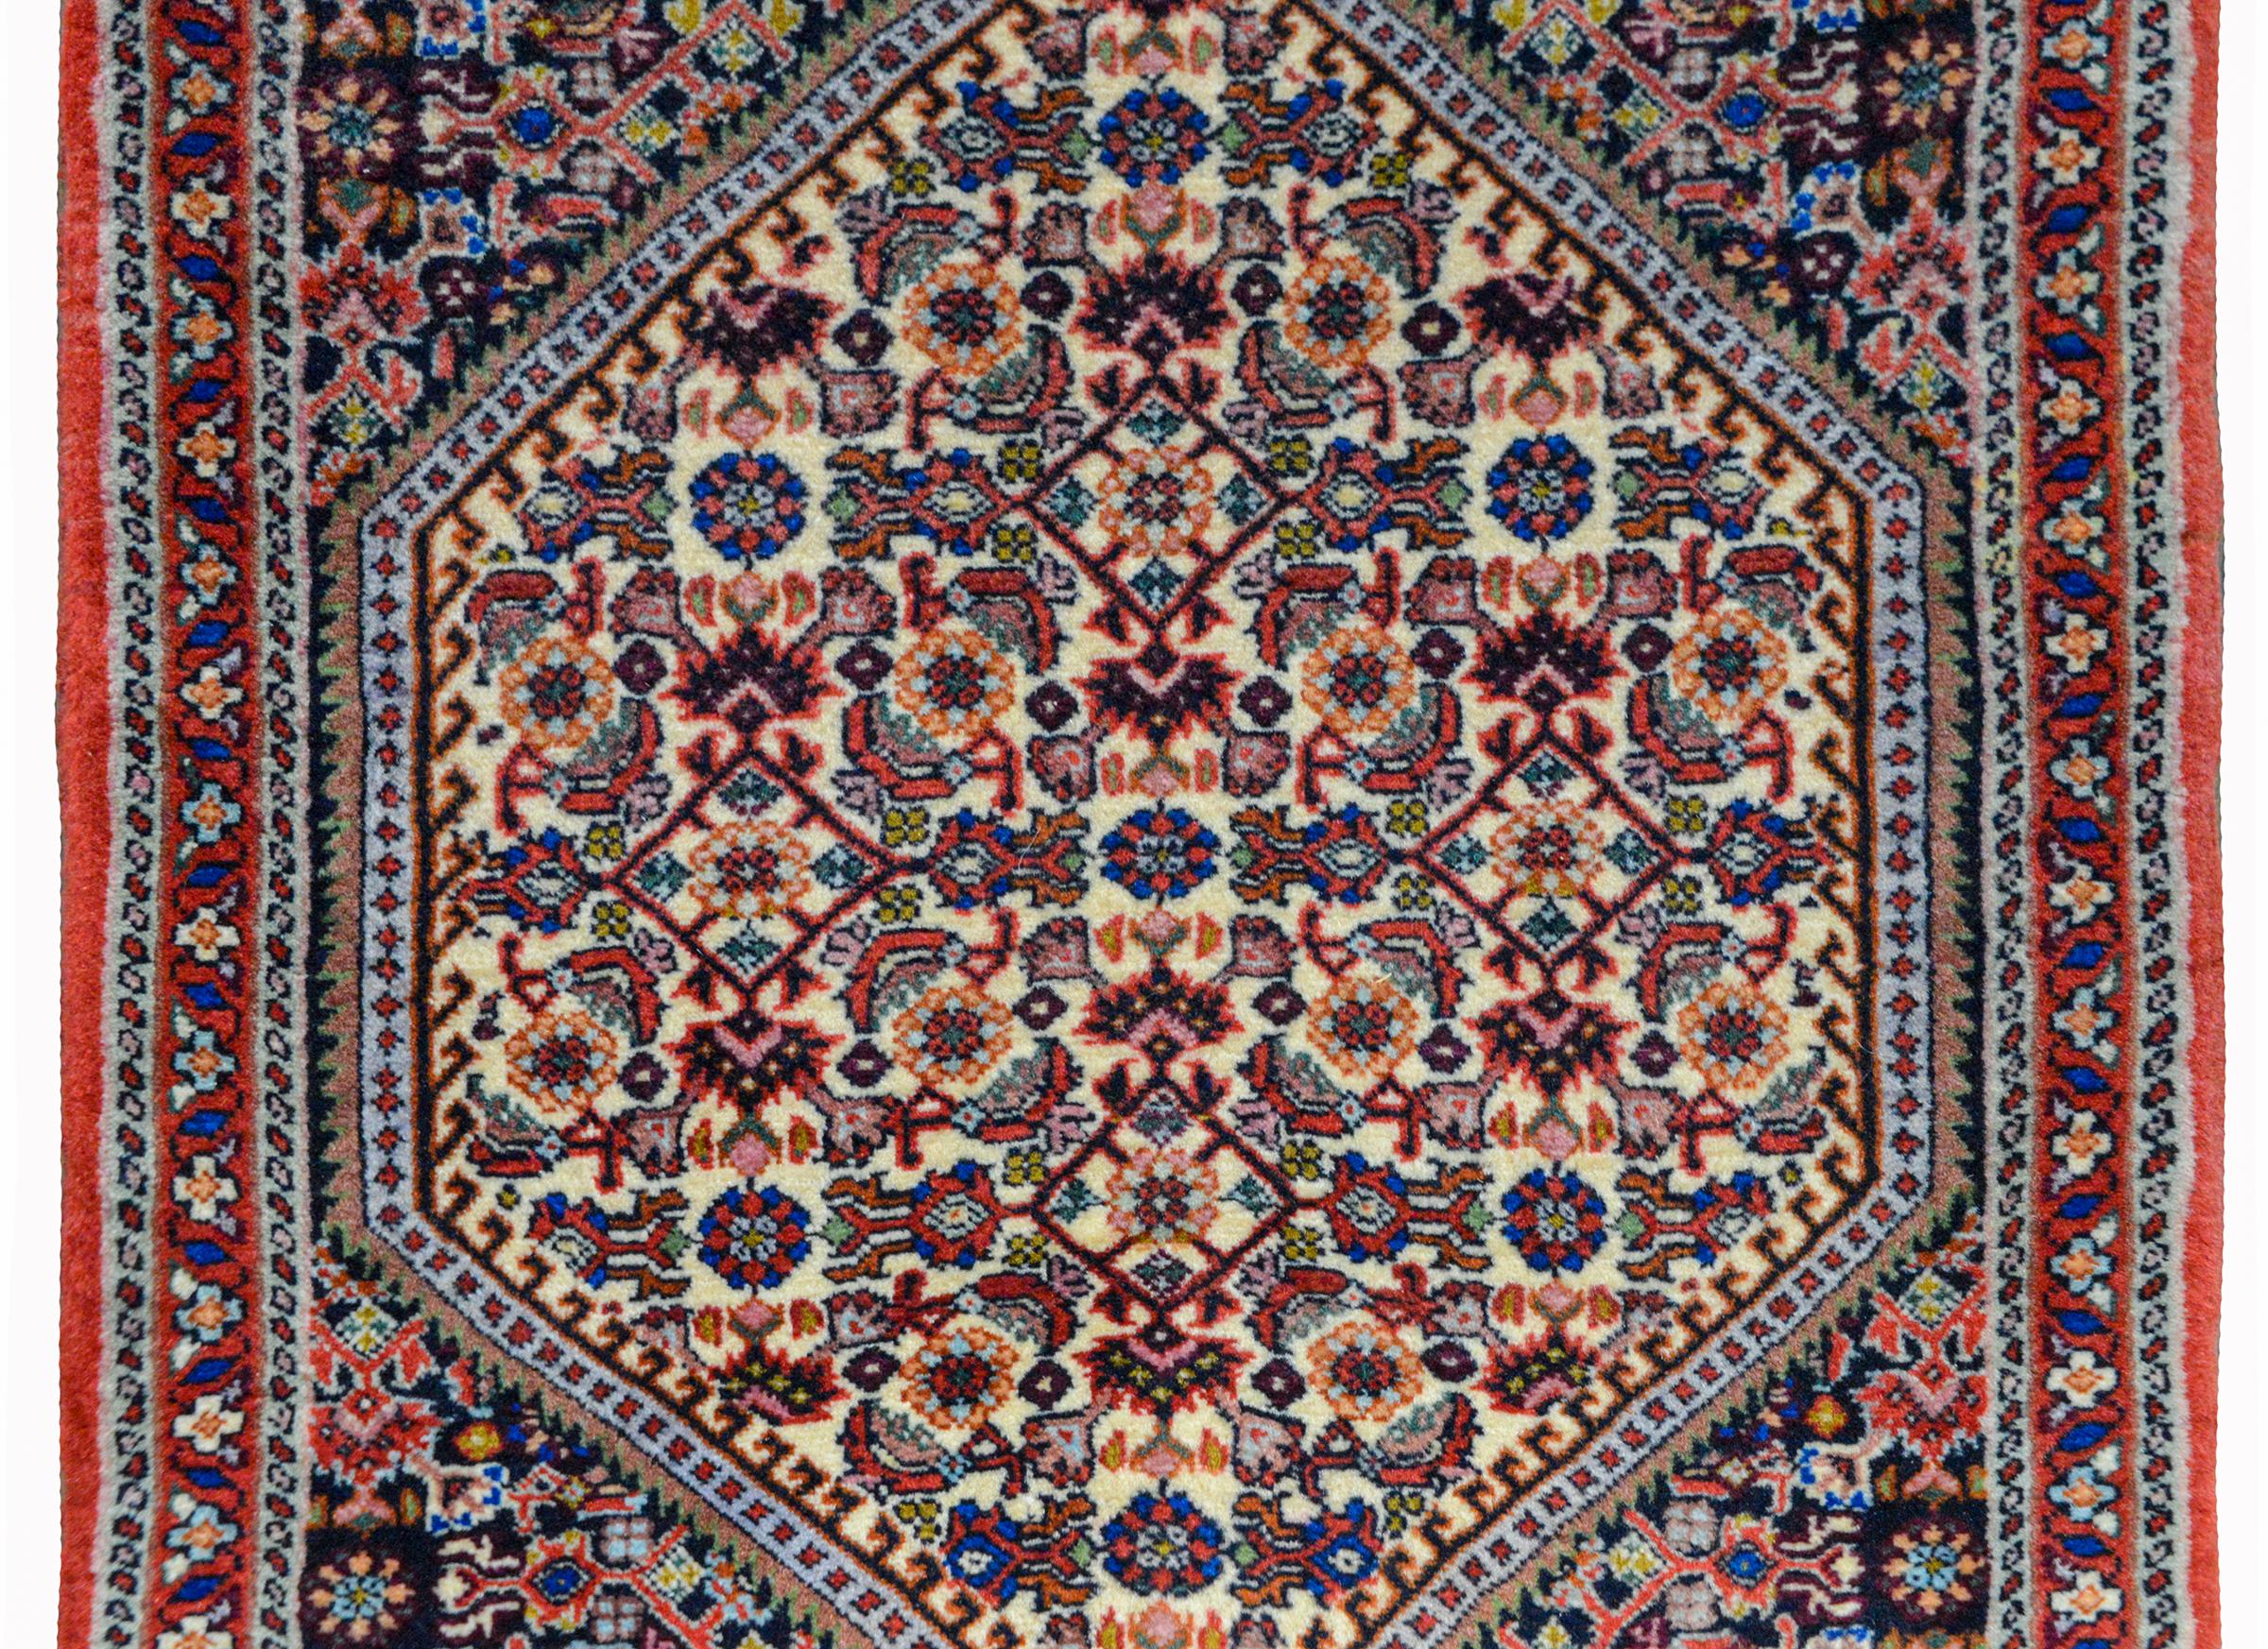 A wonderful vintage Persian Bidjar rug with a diamond medallion with a stylized floral pattern amidst a field of more stylized flowers and surrounded by a stylized floral and scrolling vine border, all woven in red, pink, lavender, and indigo